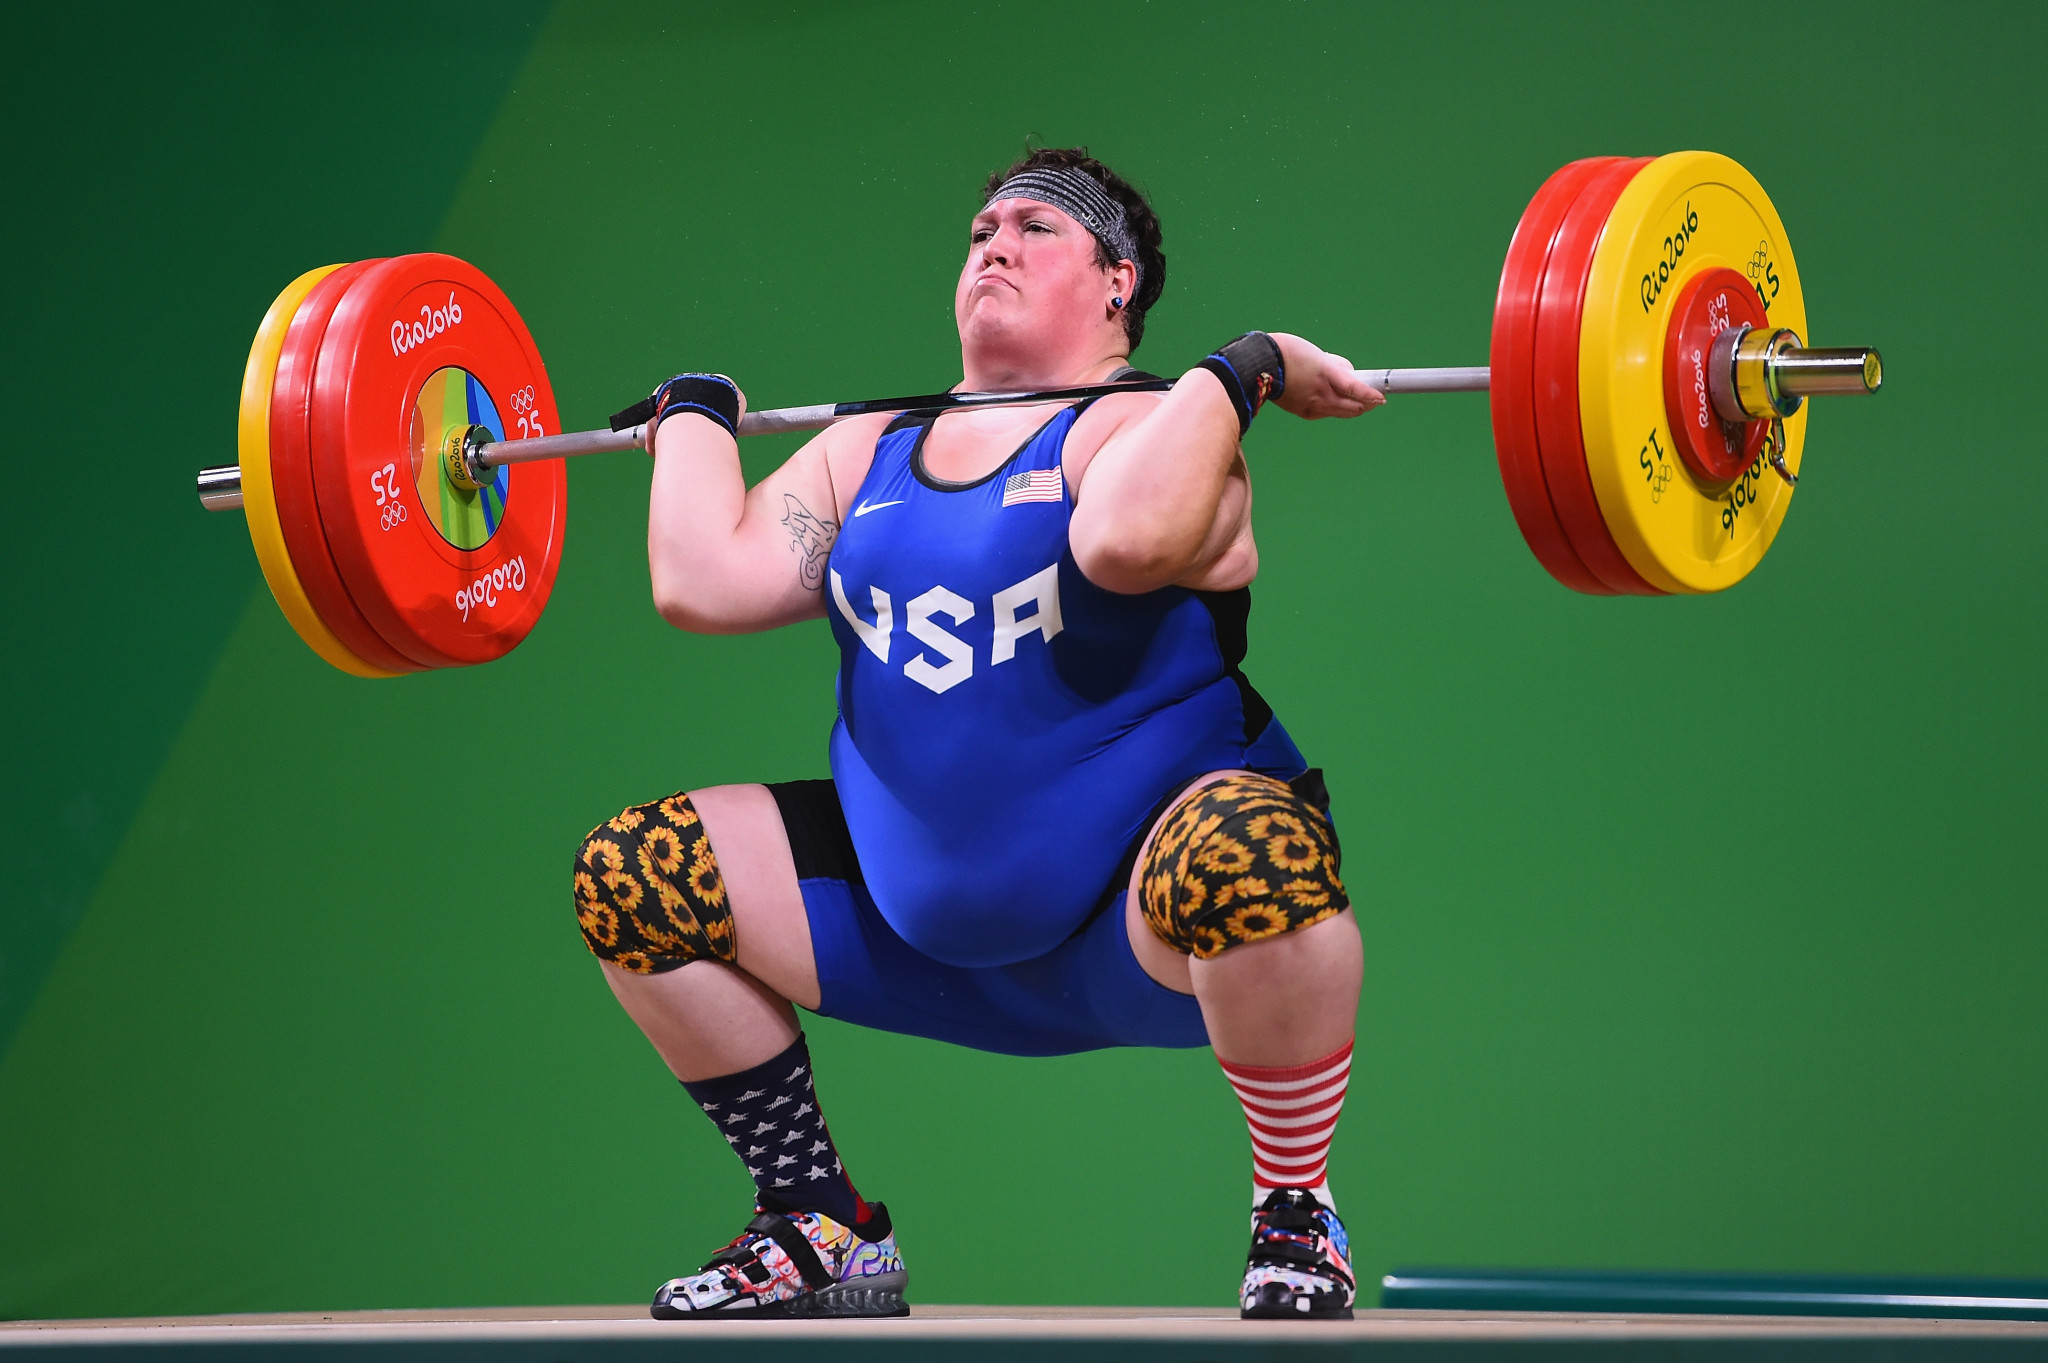 Sarah Robles of the United States secured all three gold medals available in the women's over 87 kilograms event ©Getty Images